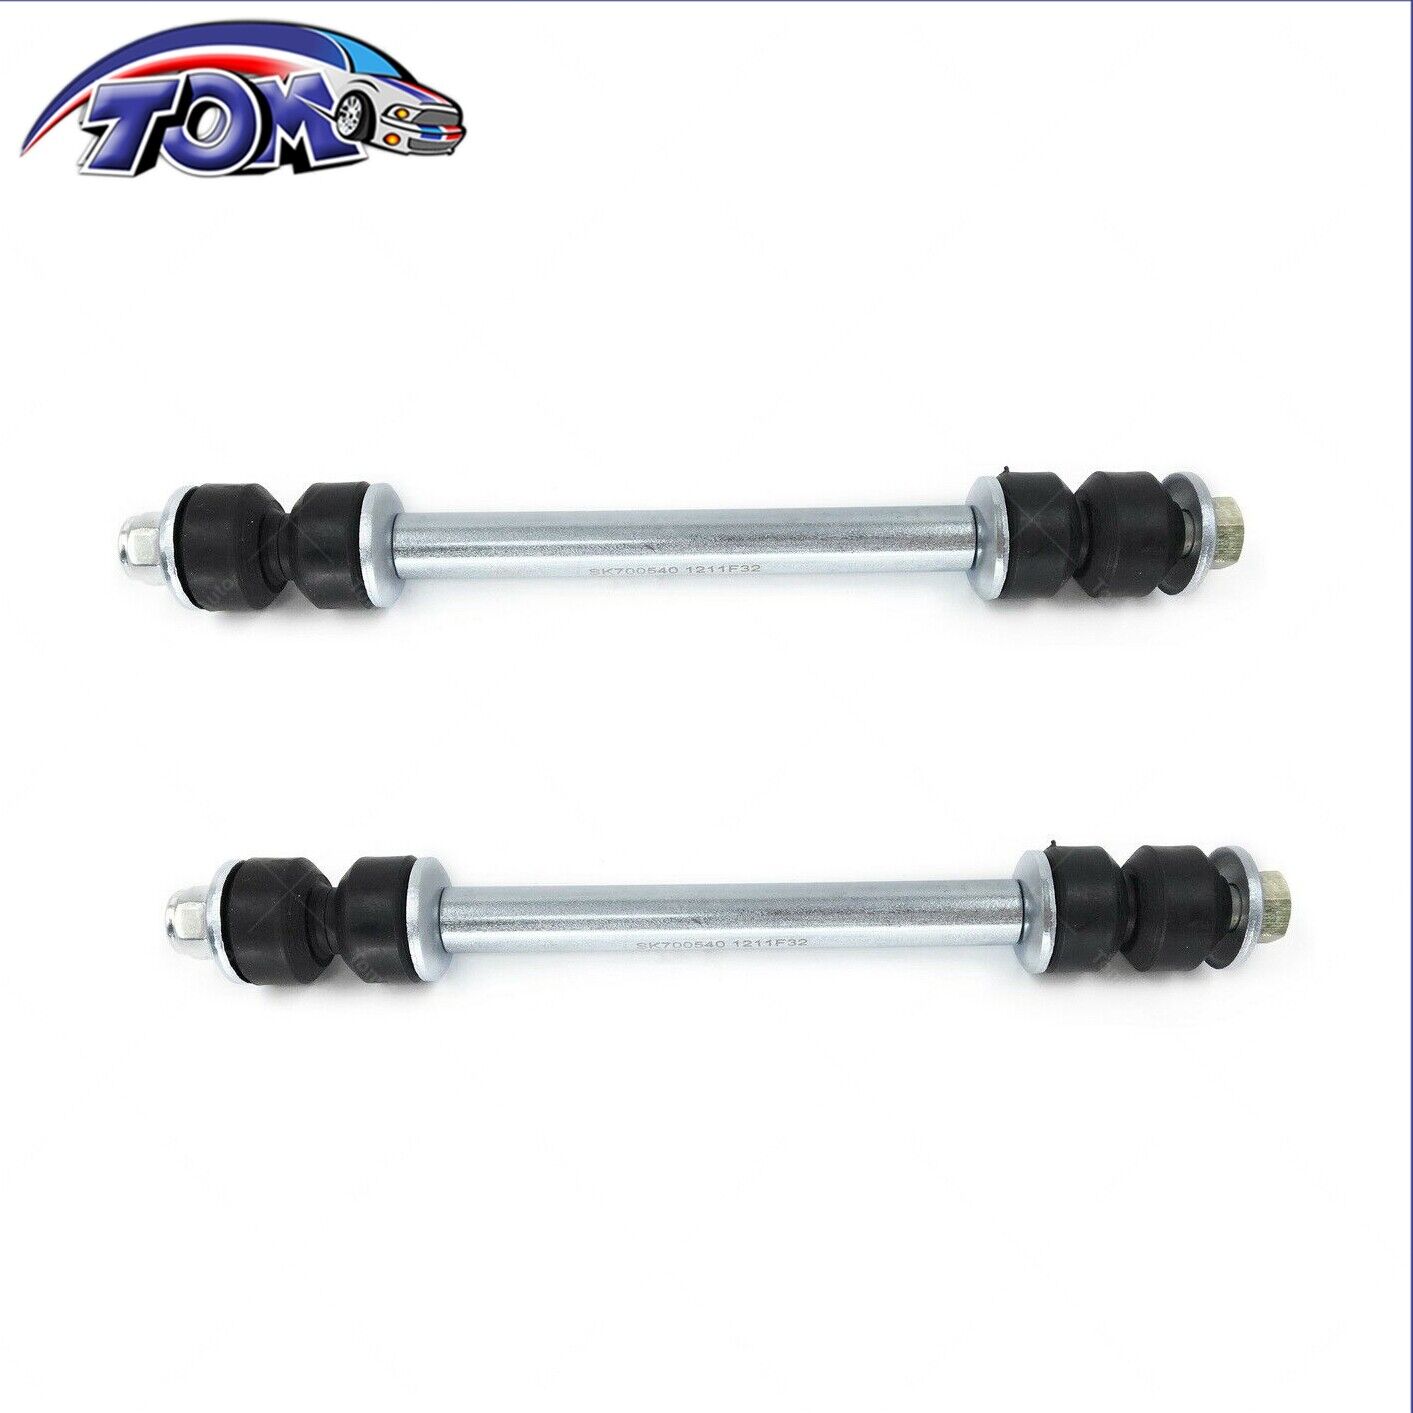 2PCS Front Sway Bar Links For Ford Explorer Ranger Mountaineer Mazda RWD 4WD